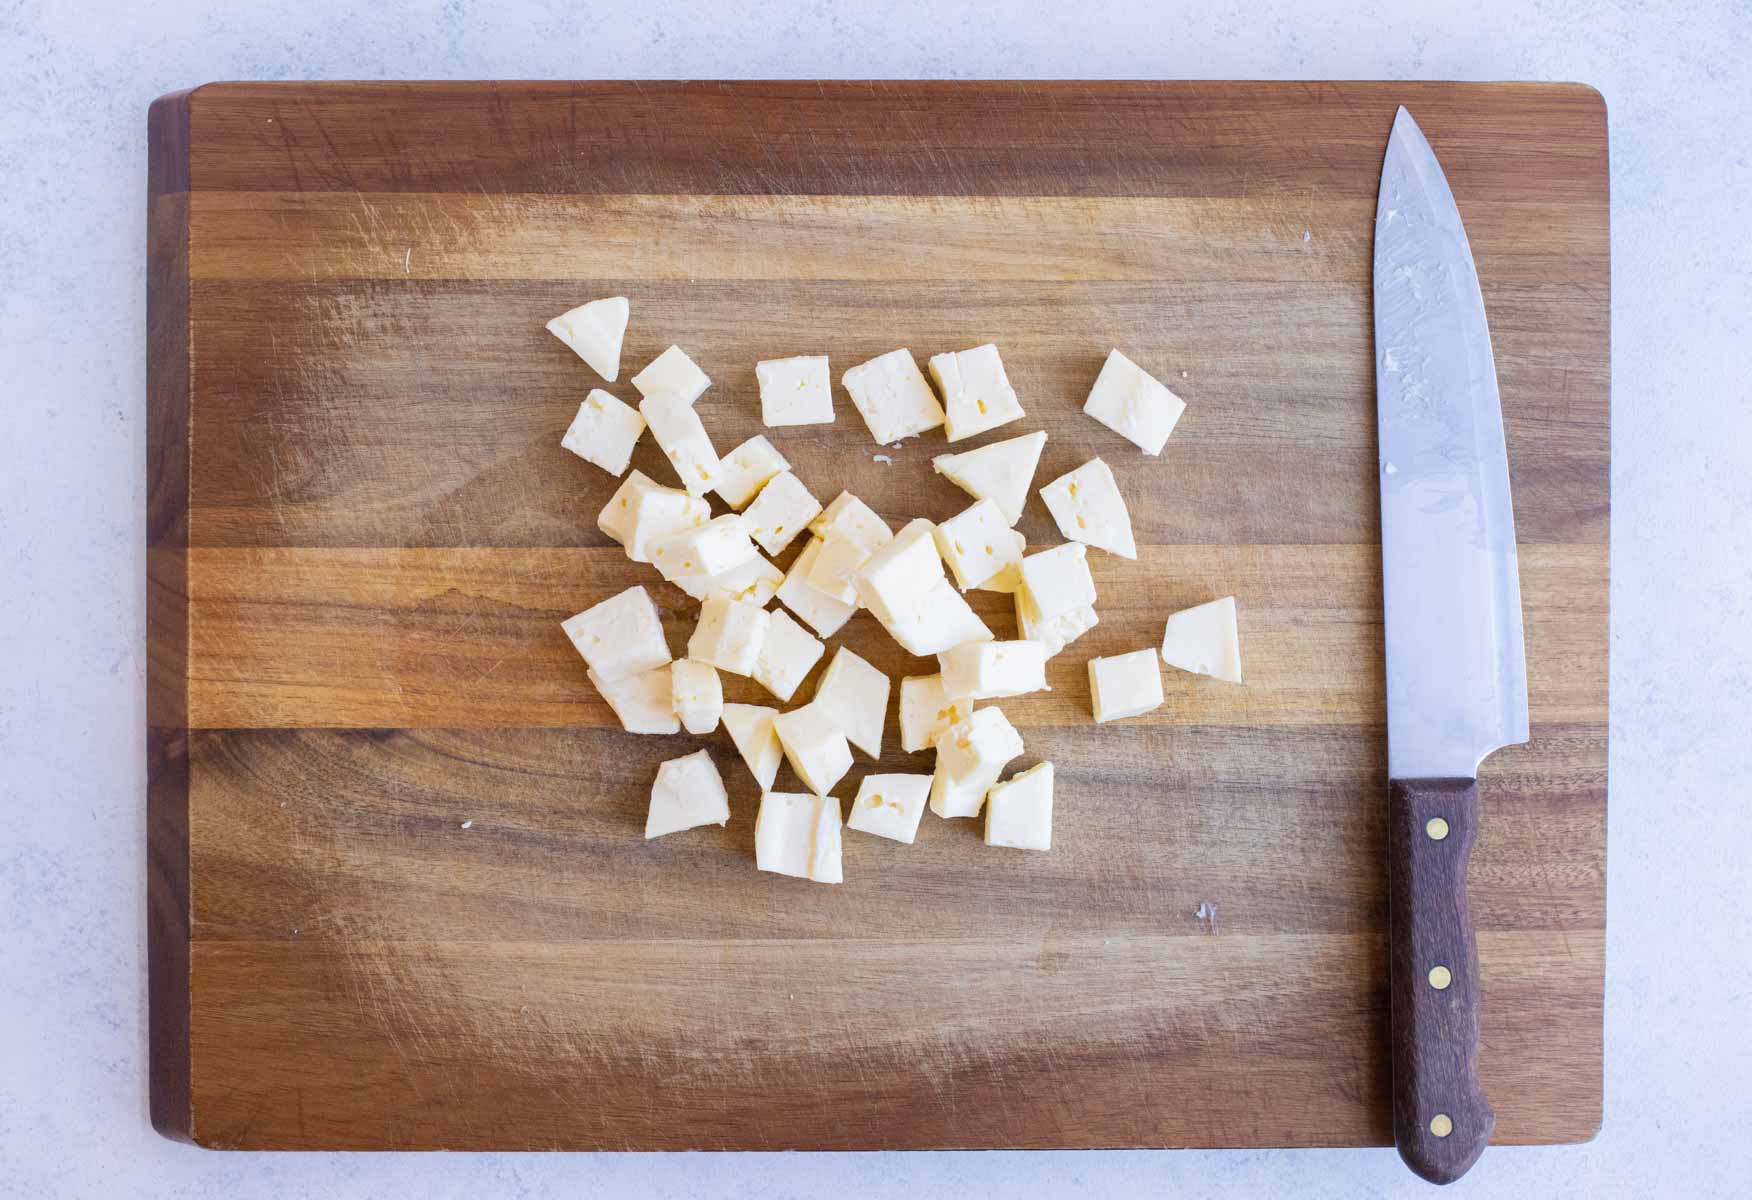 Pieces of brie are set on the cutting board before baking.